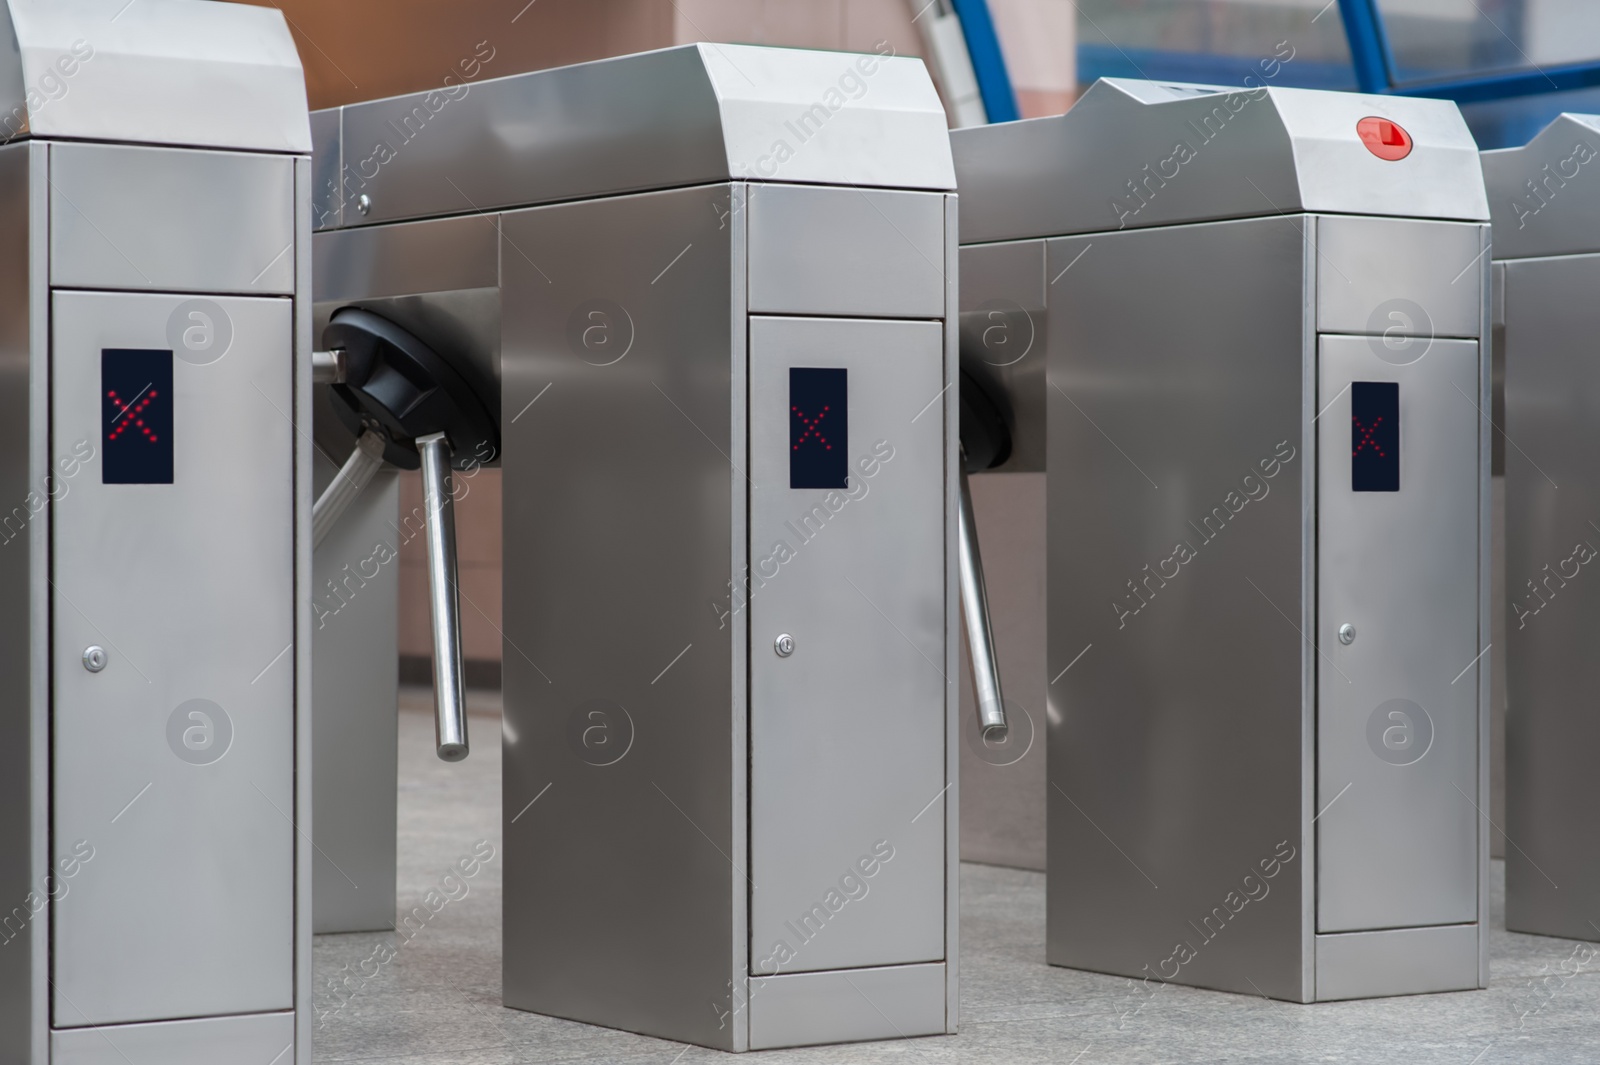 Photo of Many modern turnstiles, closeup view. Fare collection system